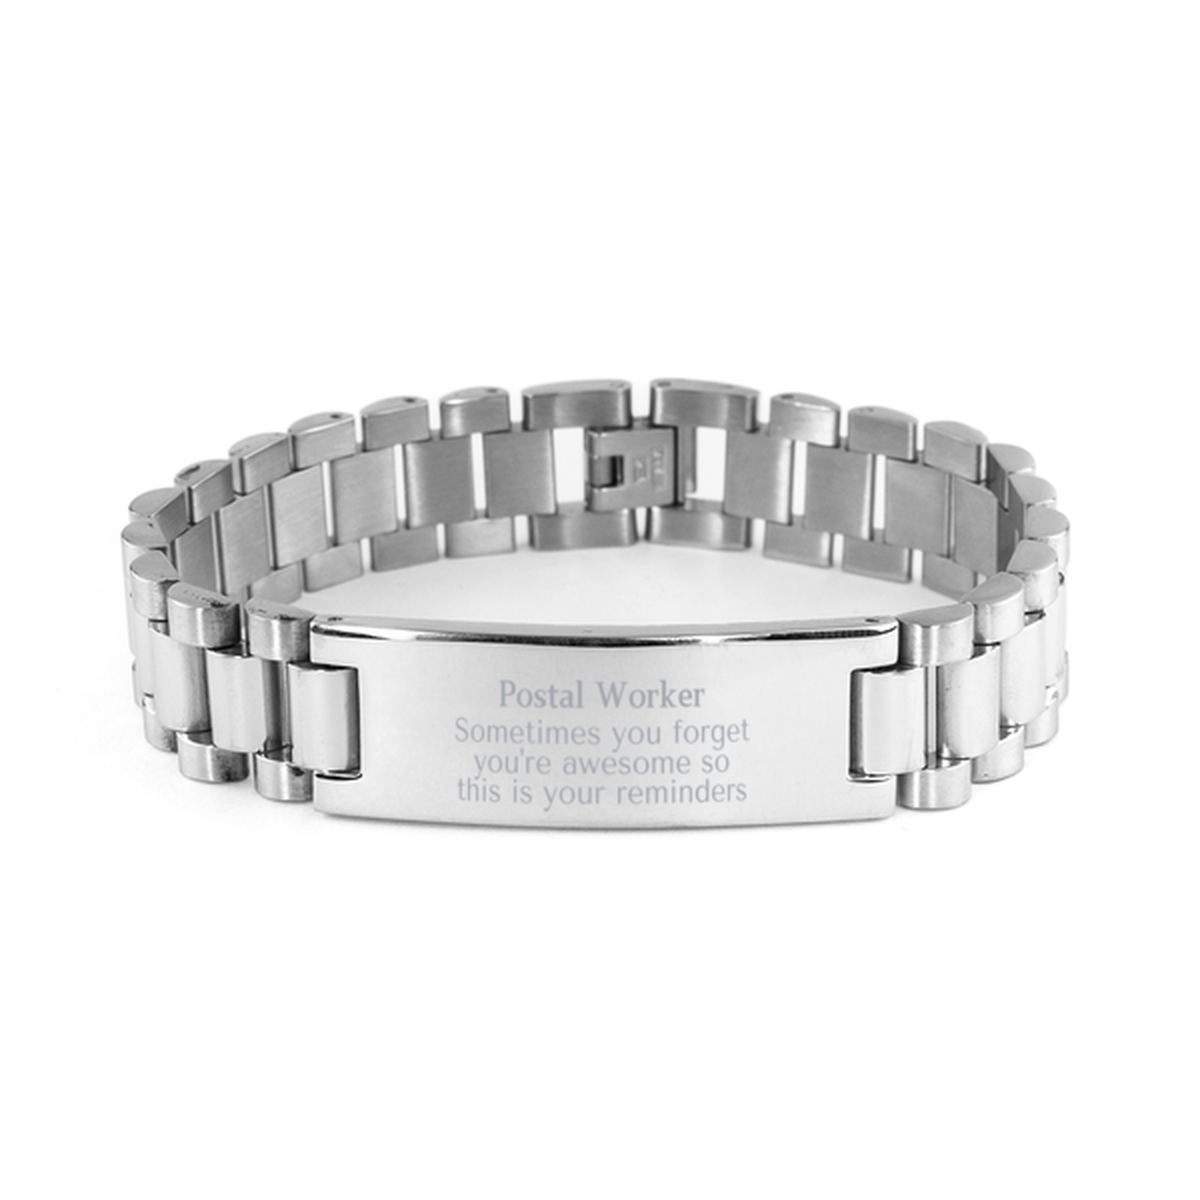 Sentimental Postal Worker Ladder Stainless Steel Bracelet, Postal Worker Sometimes you forget you're awesome so this is your reminders, Graduation Christmas Birthday Gifts for Postal Worker, Men, Women, Coworkers